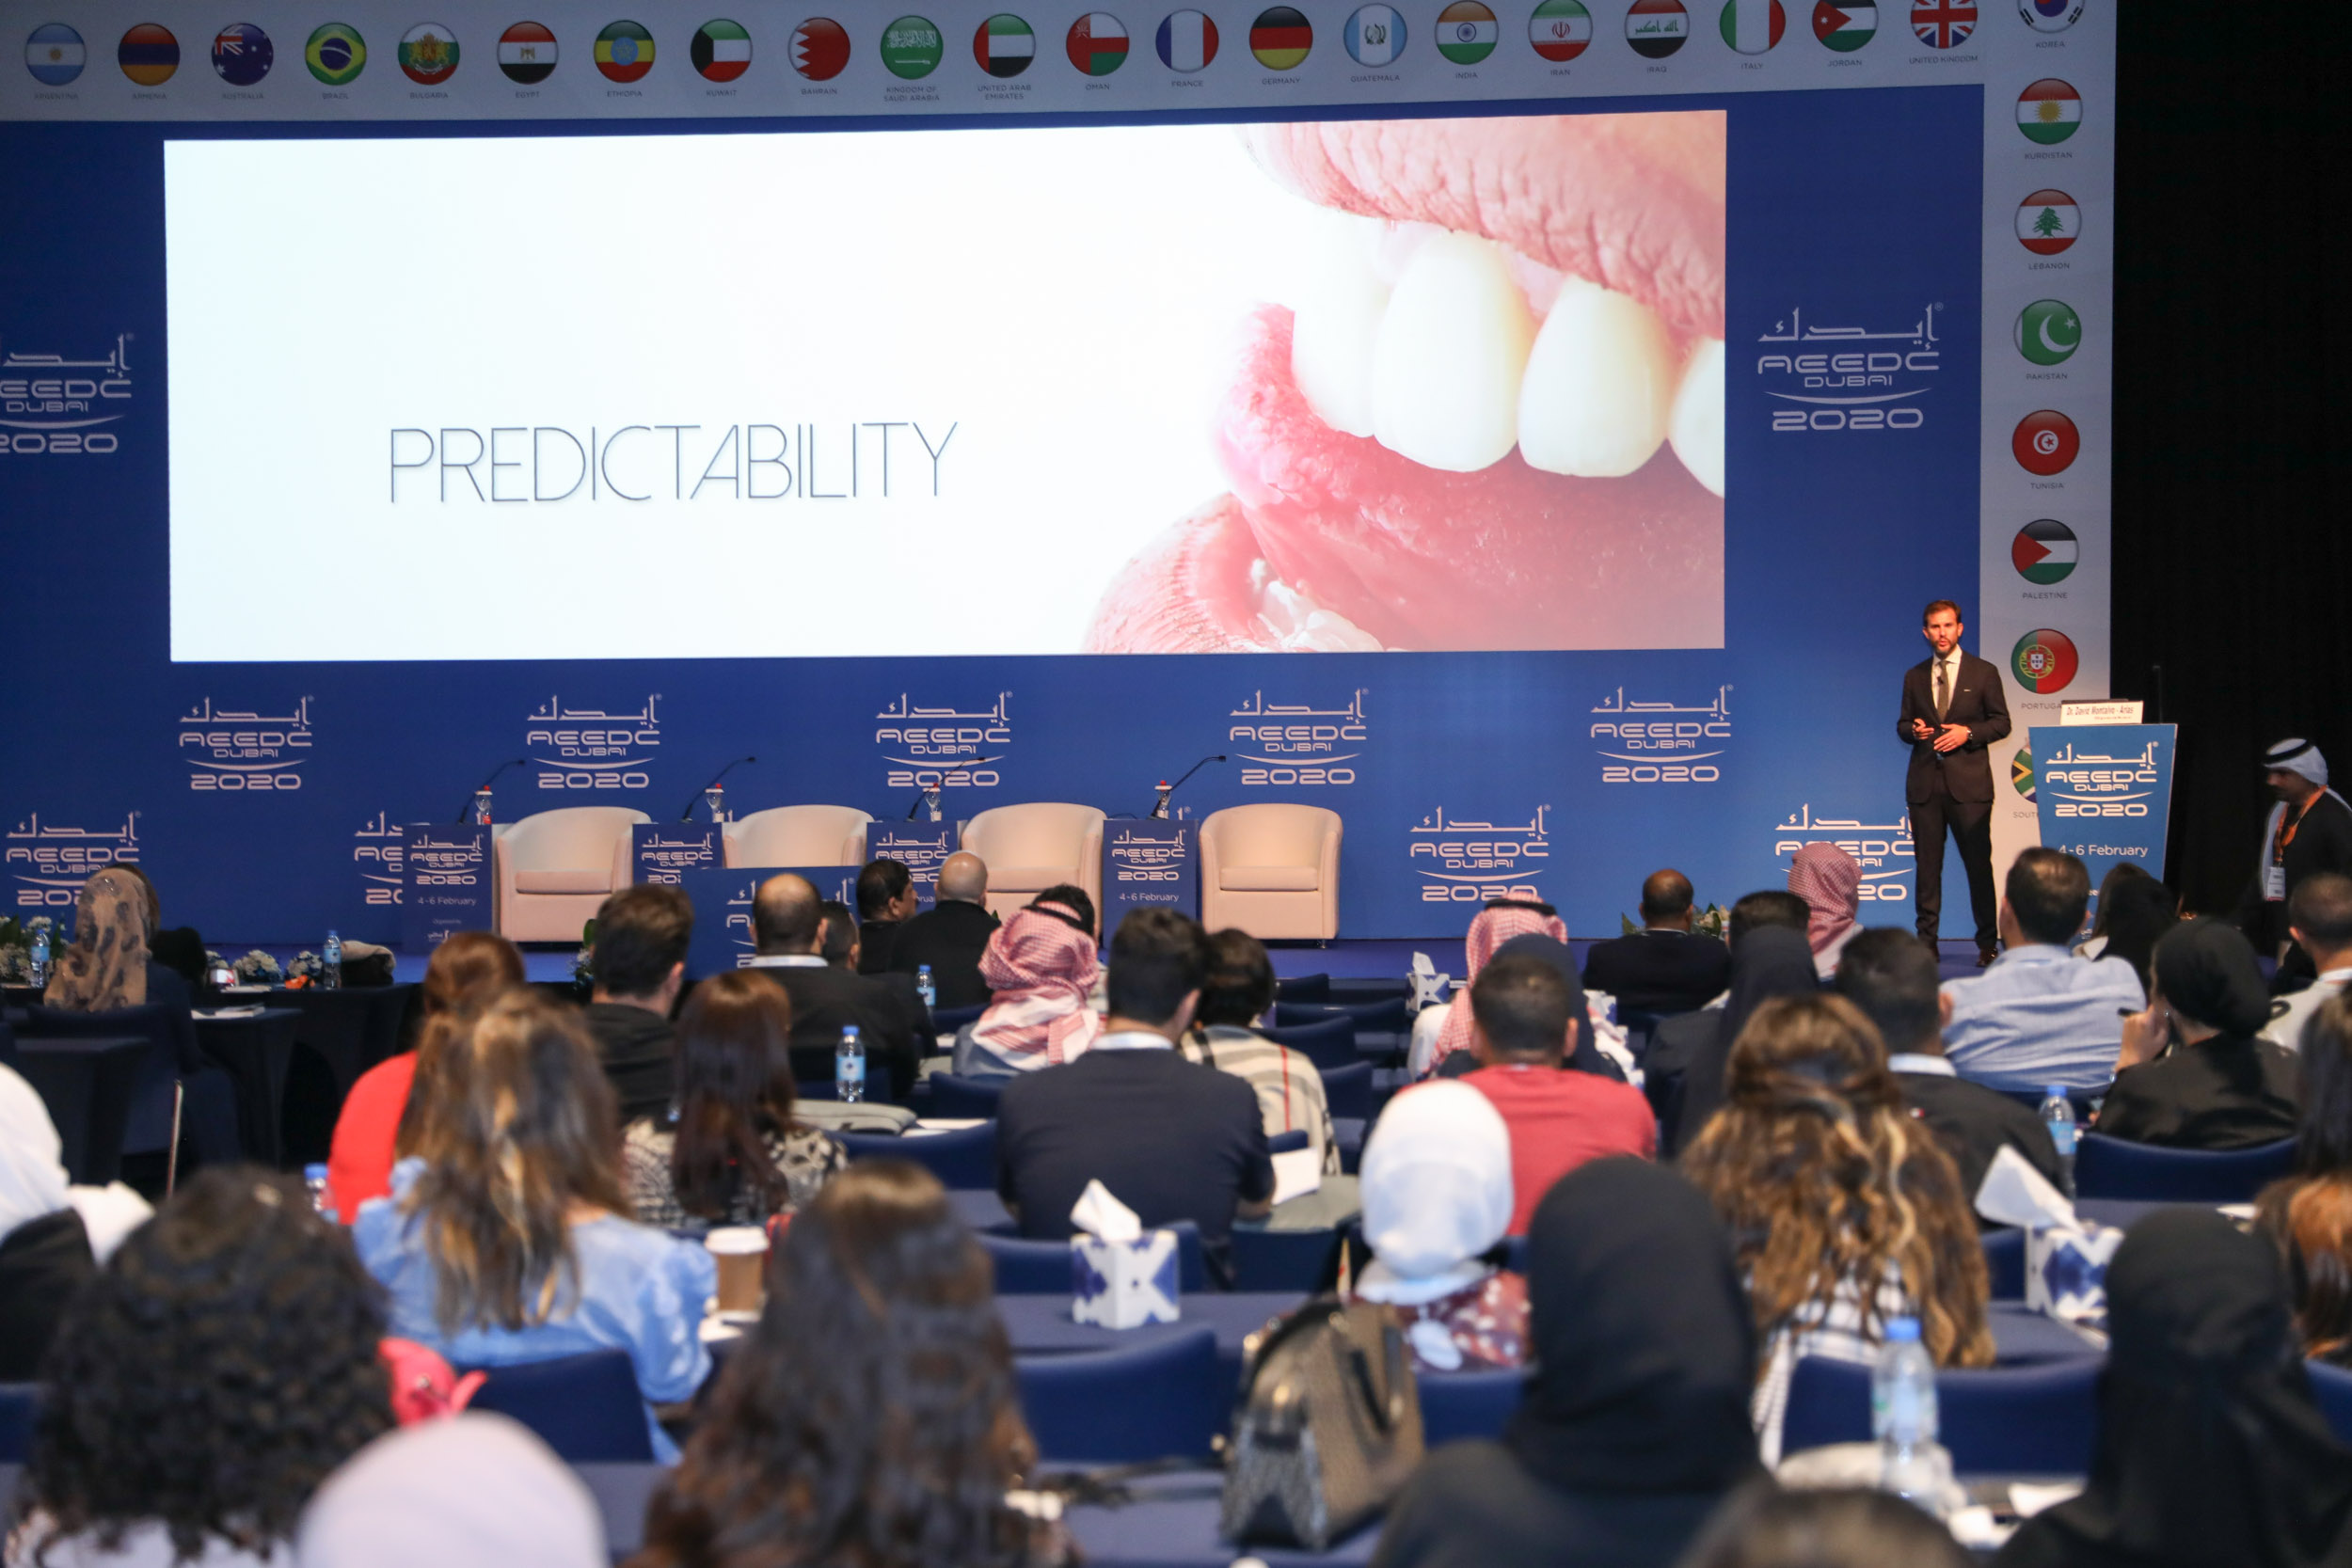 AEEDC Dubai, world’s largest scientific dental conference and